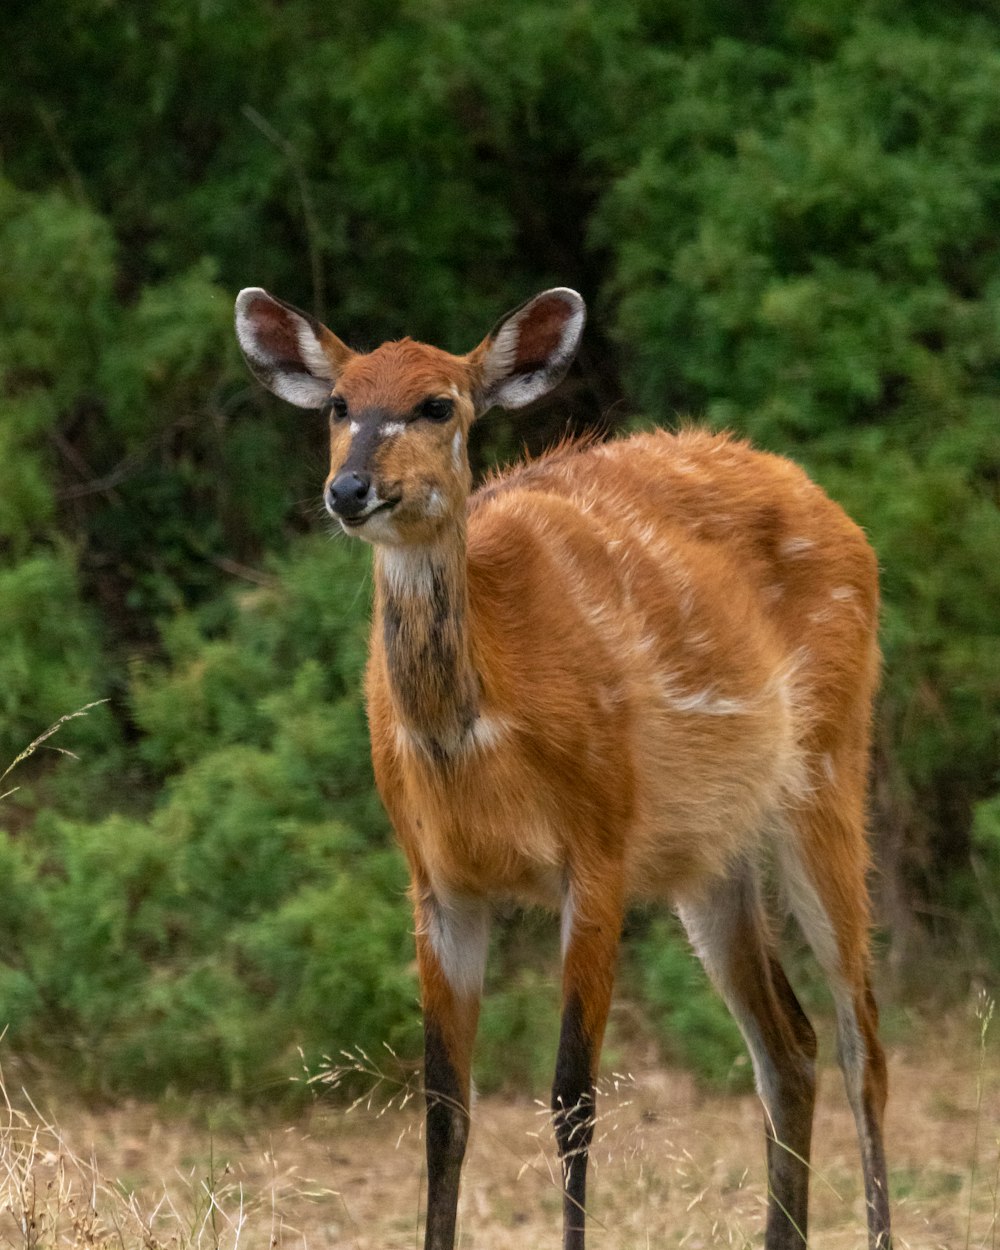 a small deer standing in a field with trees in the background